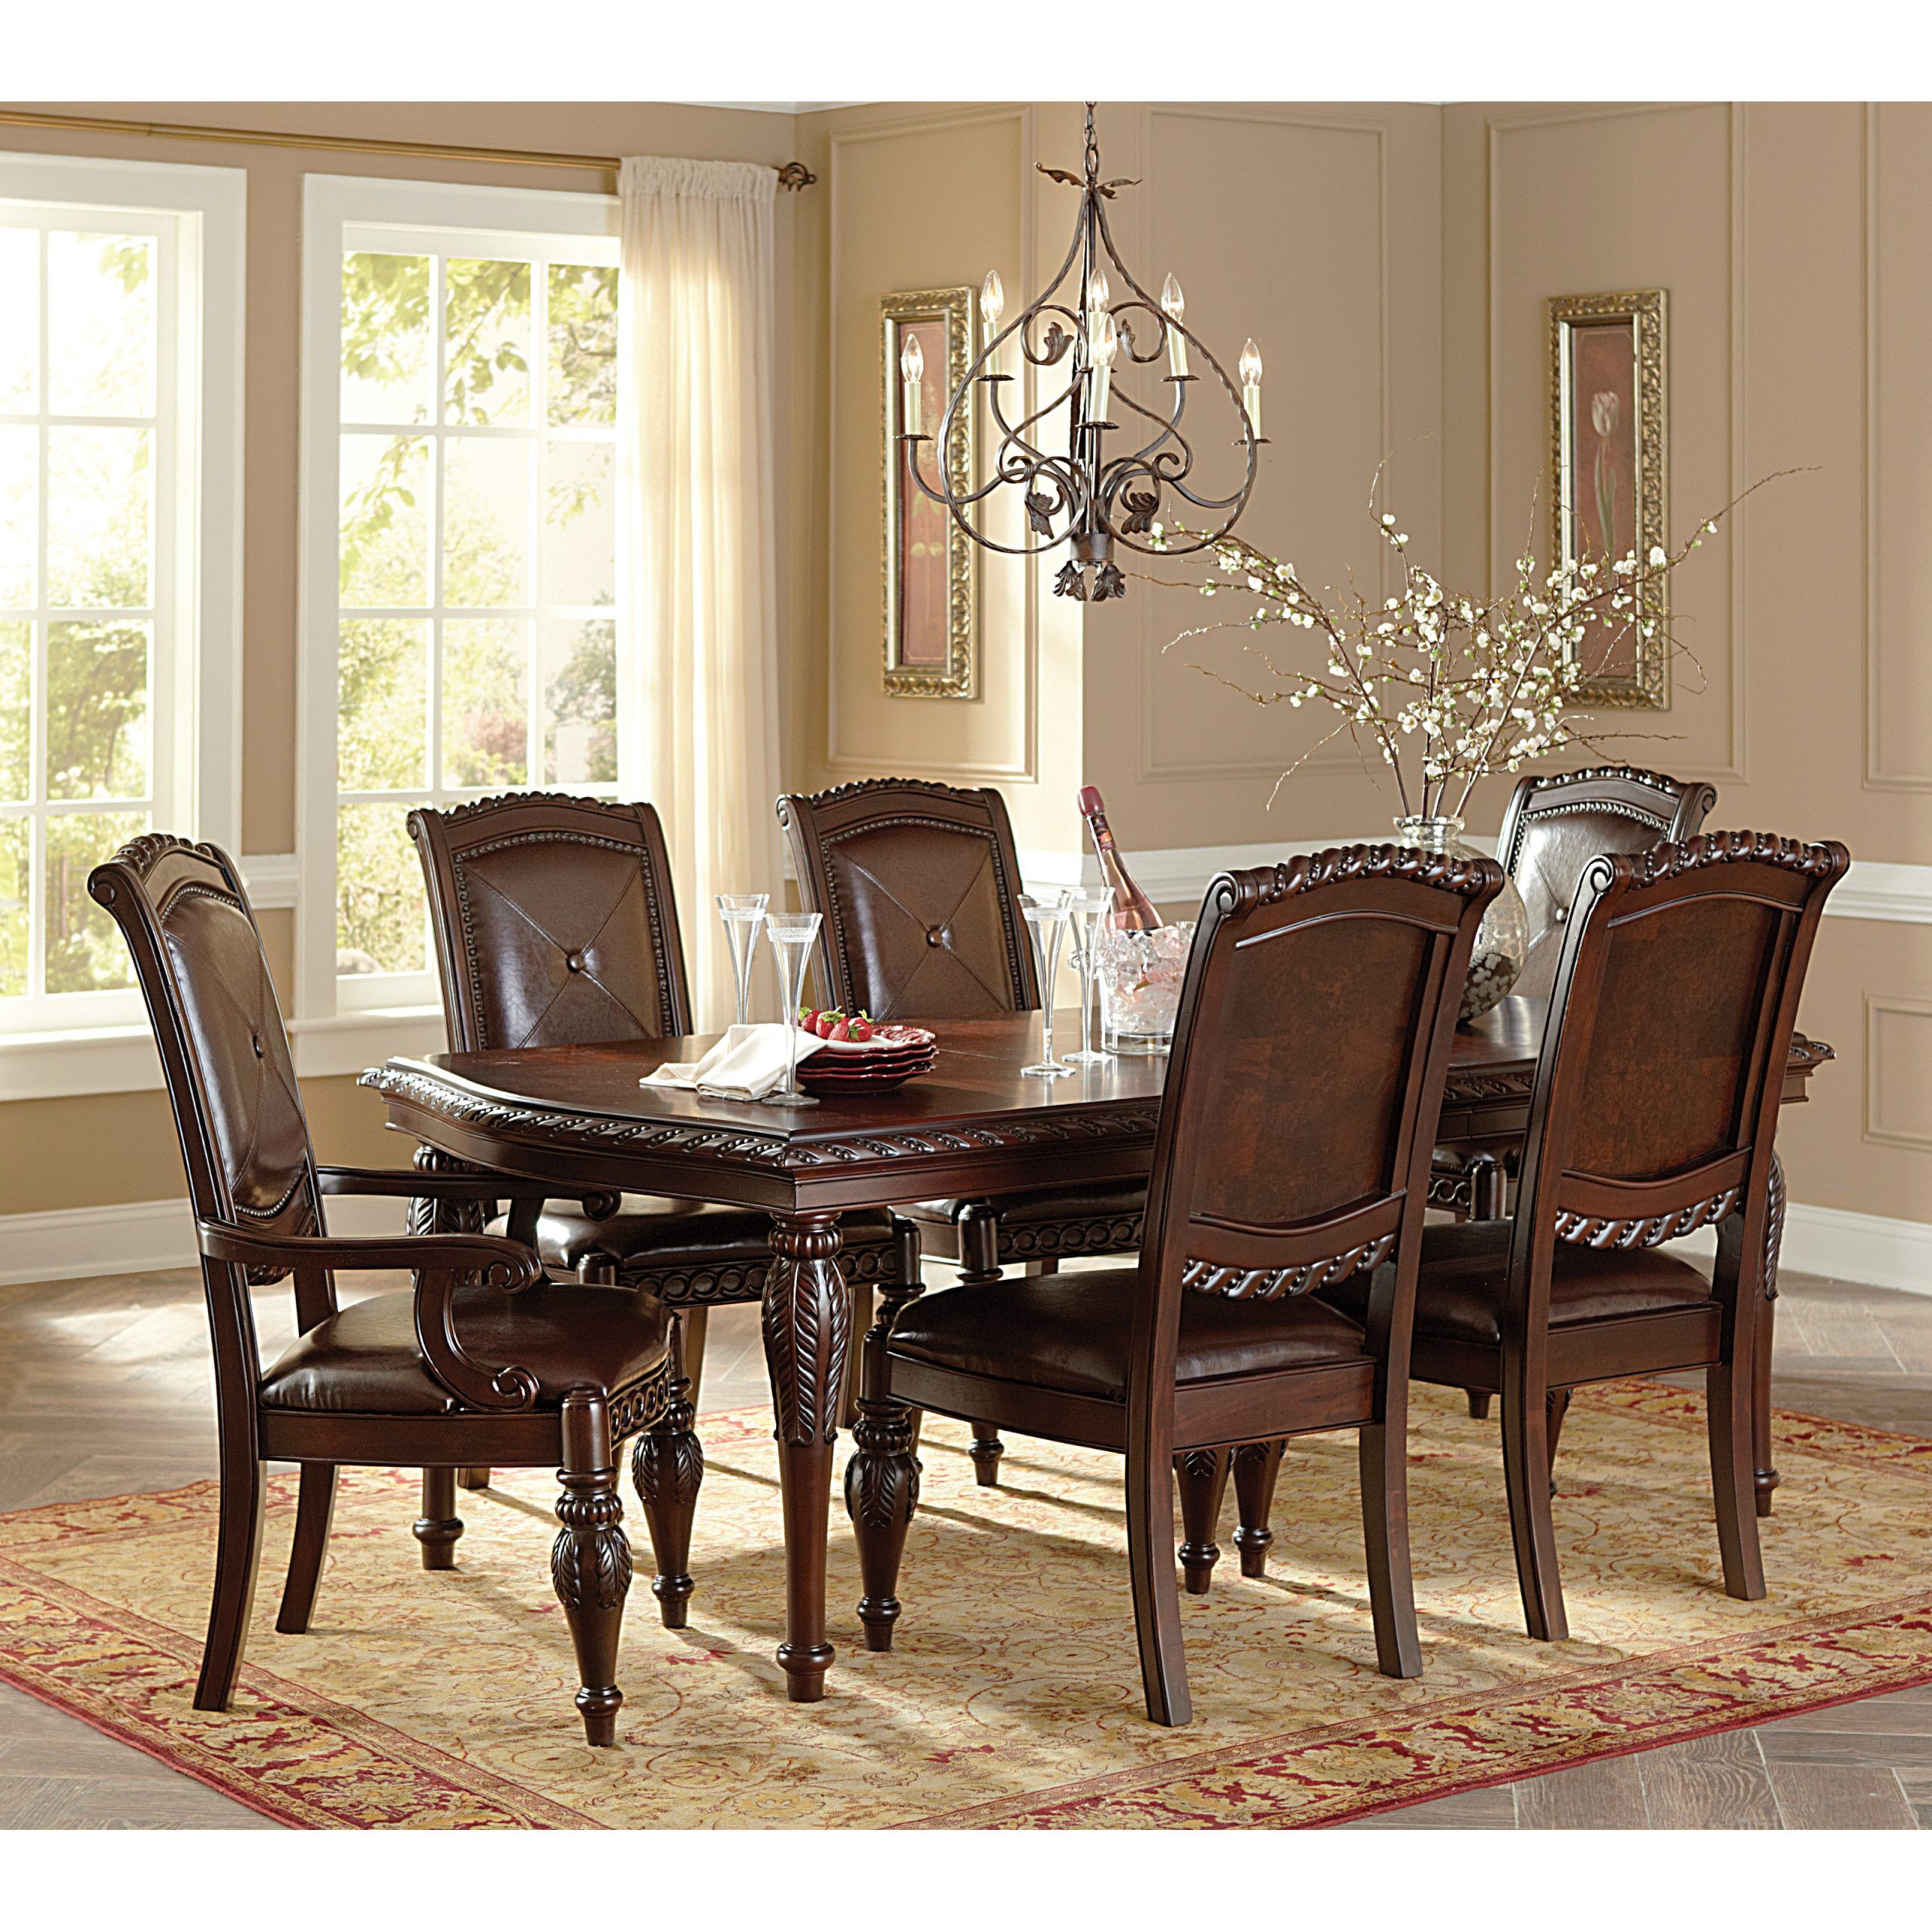 Silver Dining Tables Intended For Famous Steve Silver Antoinette 7 Piece Dining Table Set – Cherry (View 7 of 15)